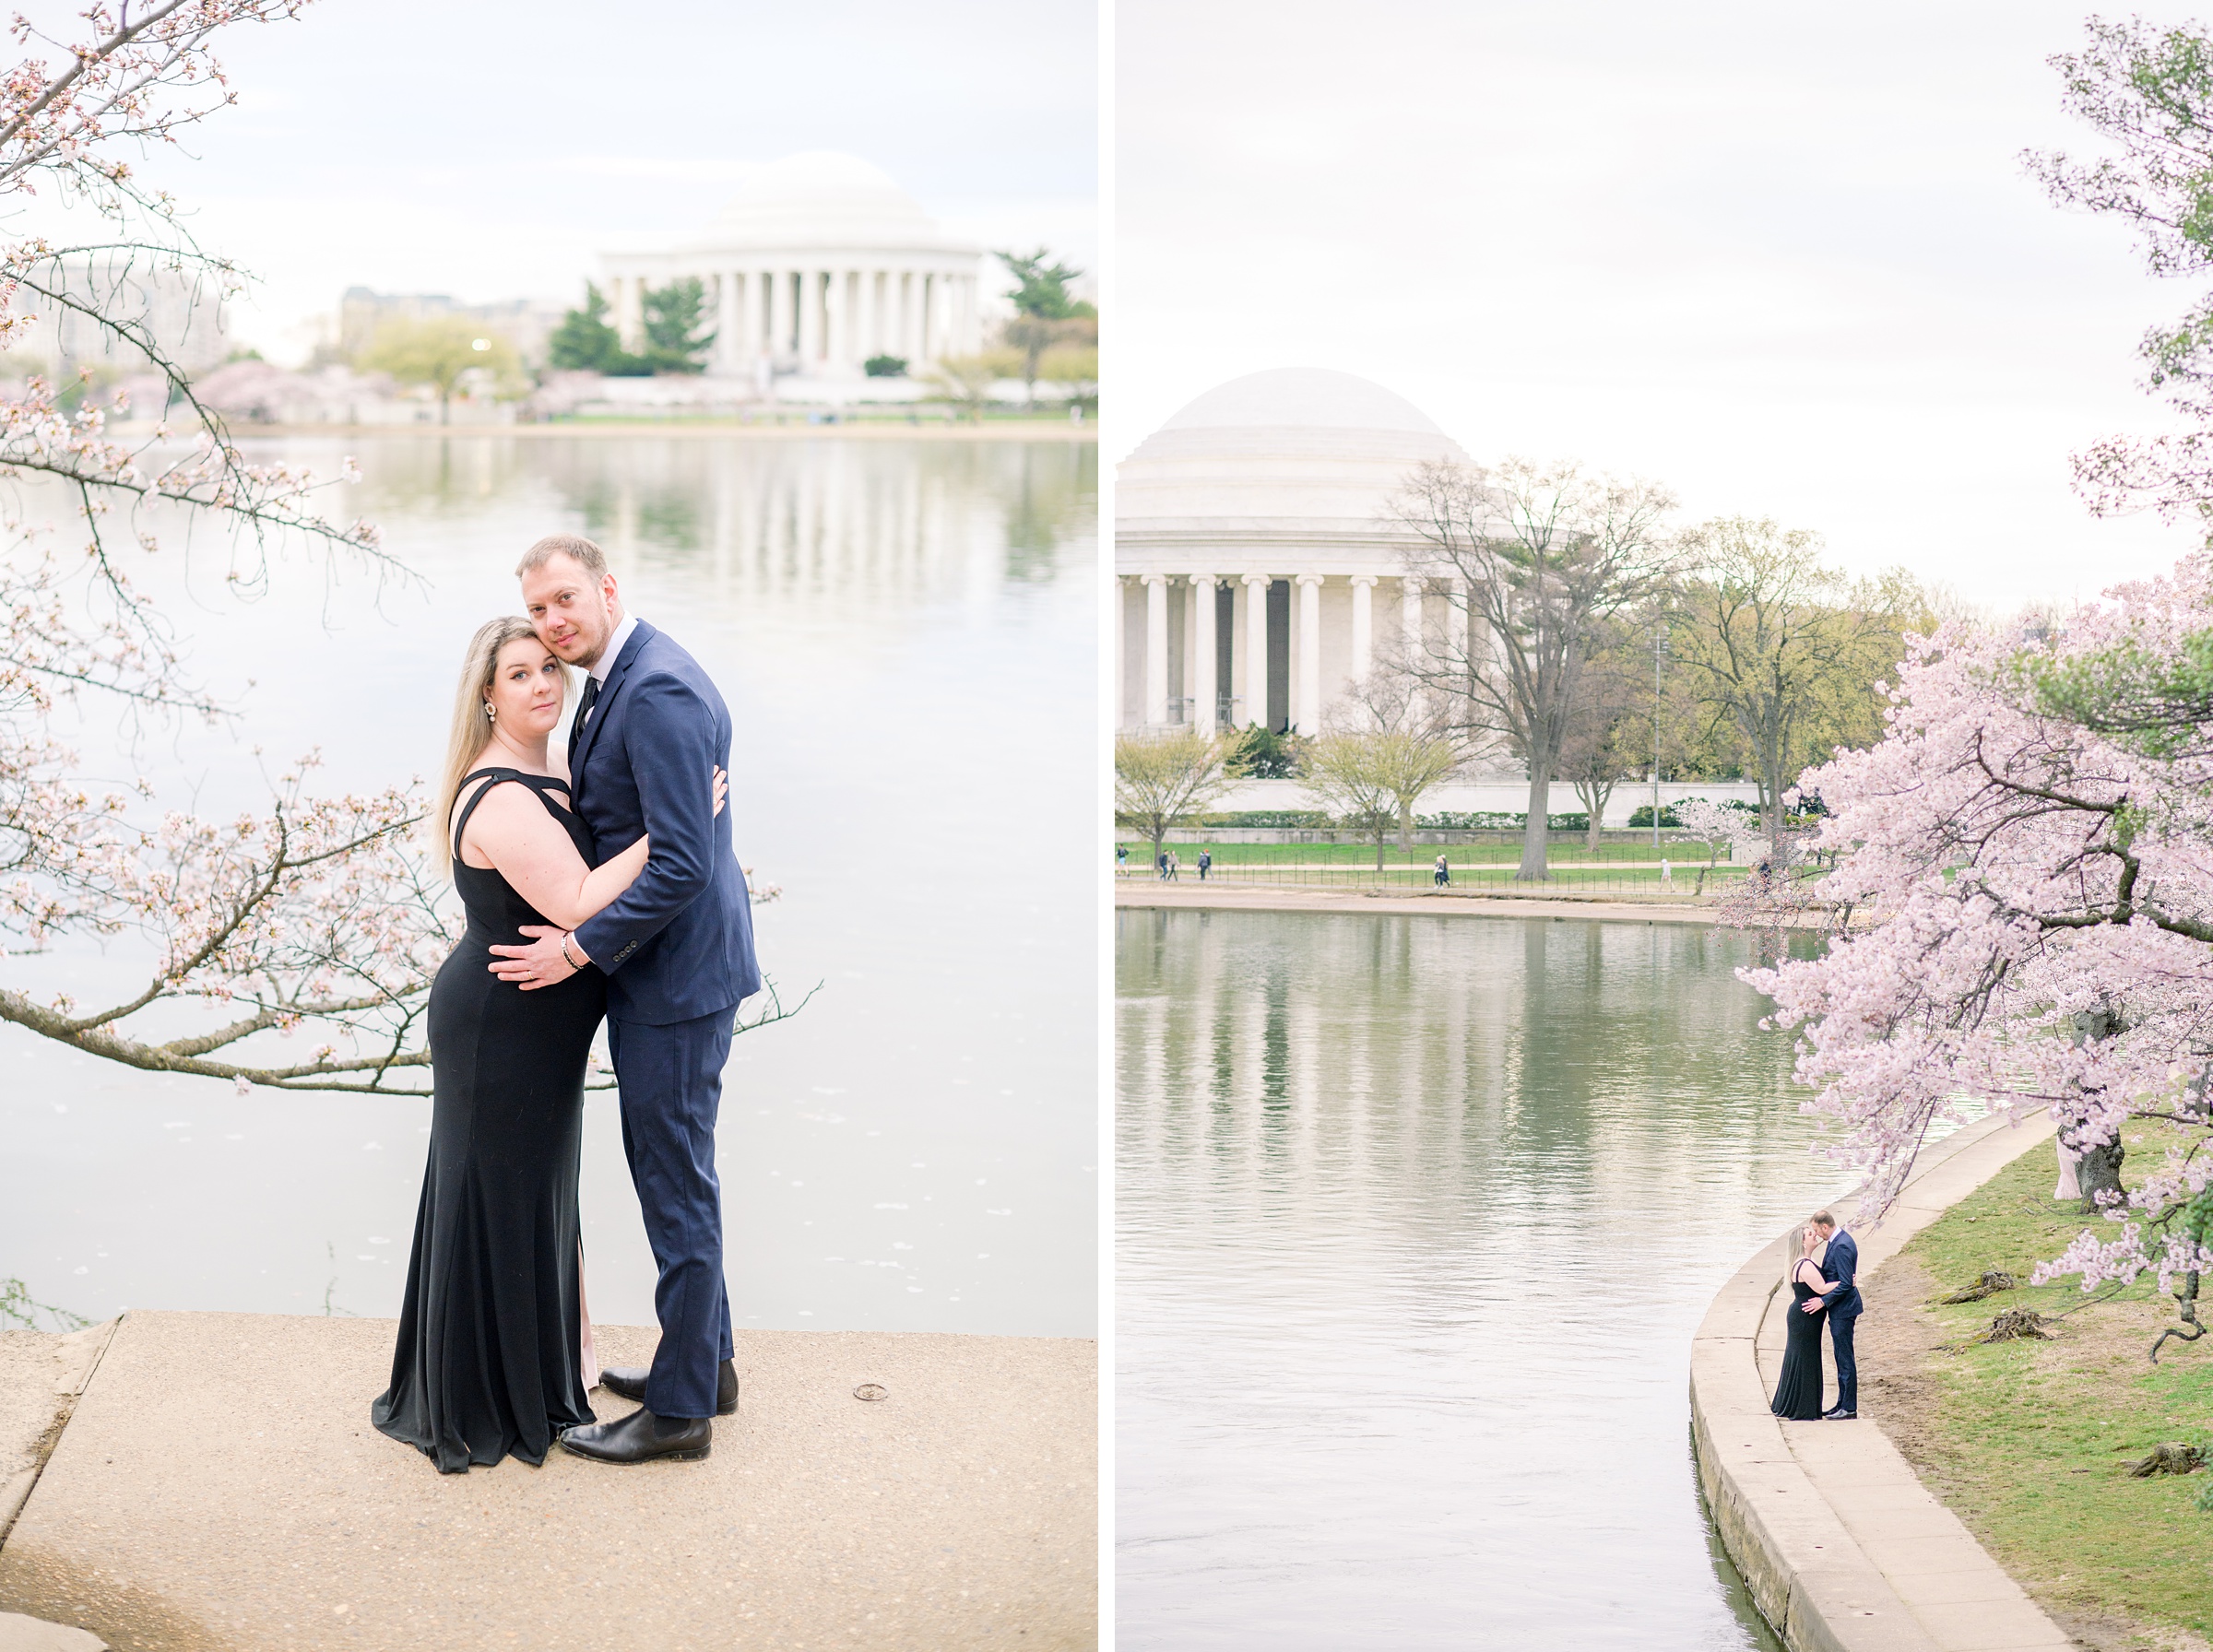 Cherry Blossom portrait session at the Jefferson Memorial in Washington DC photographed by Baltimore Wedding Photographer Cait Kramer Photography